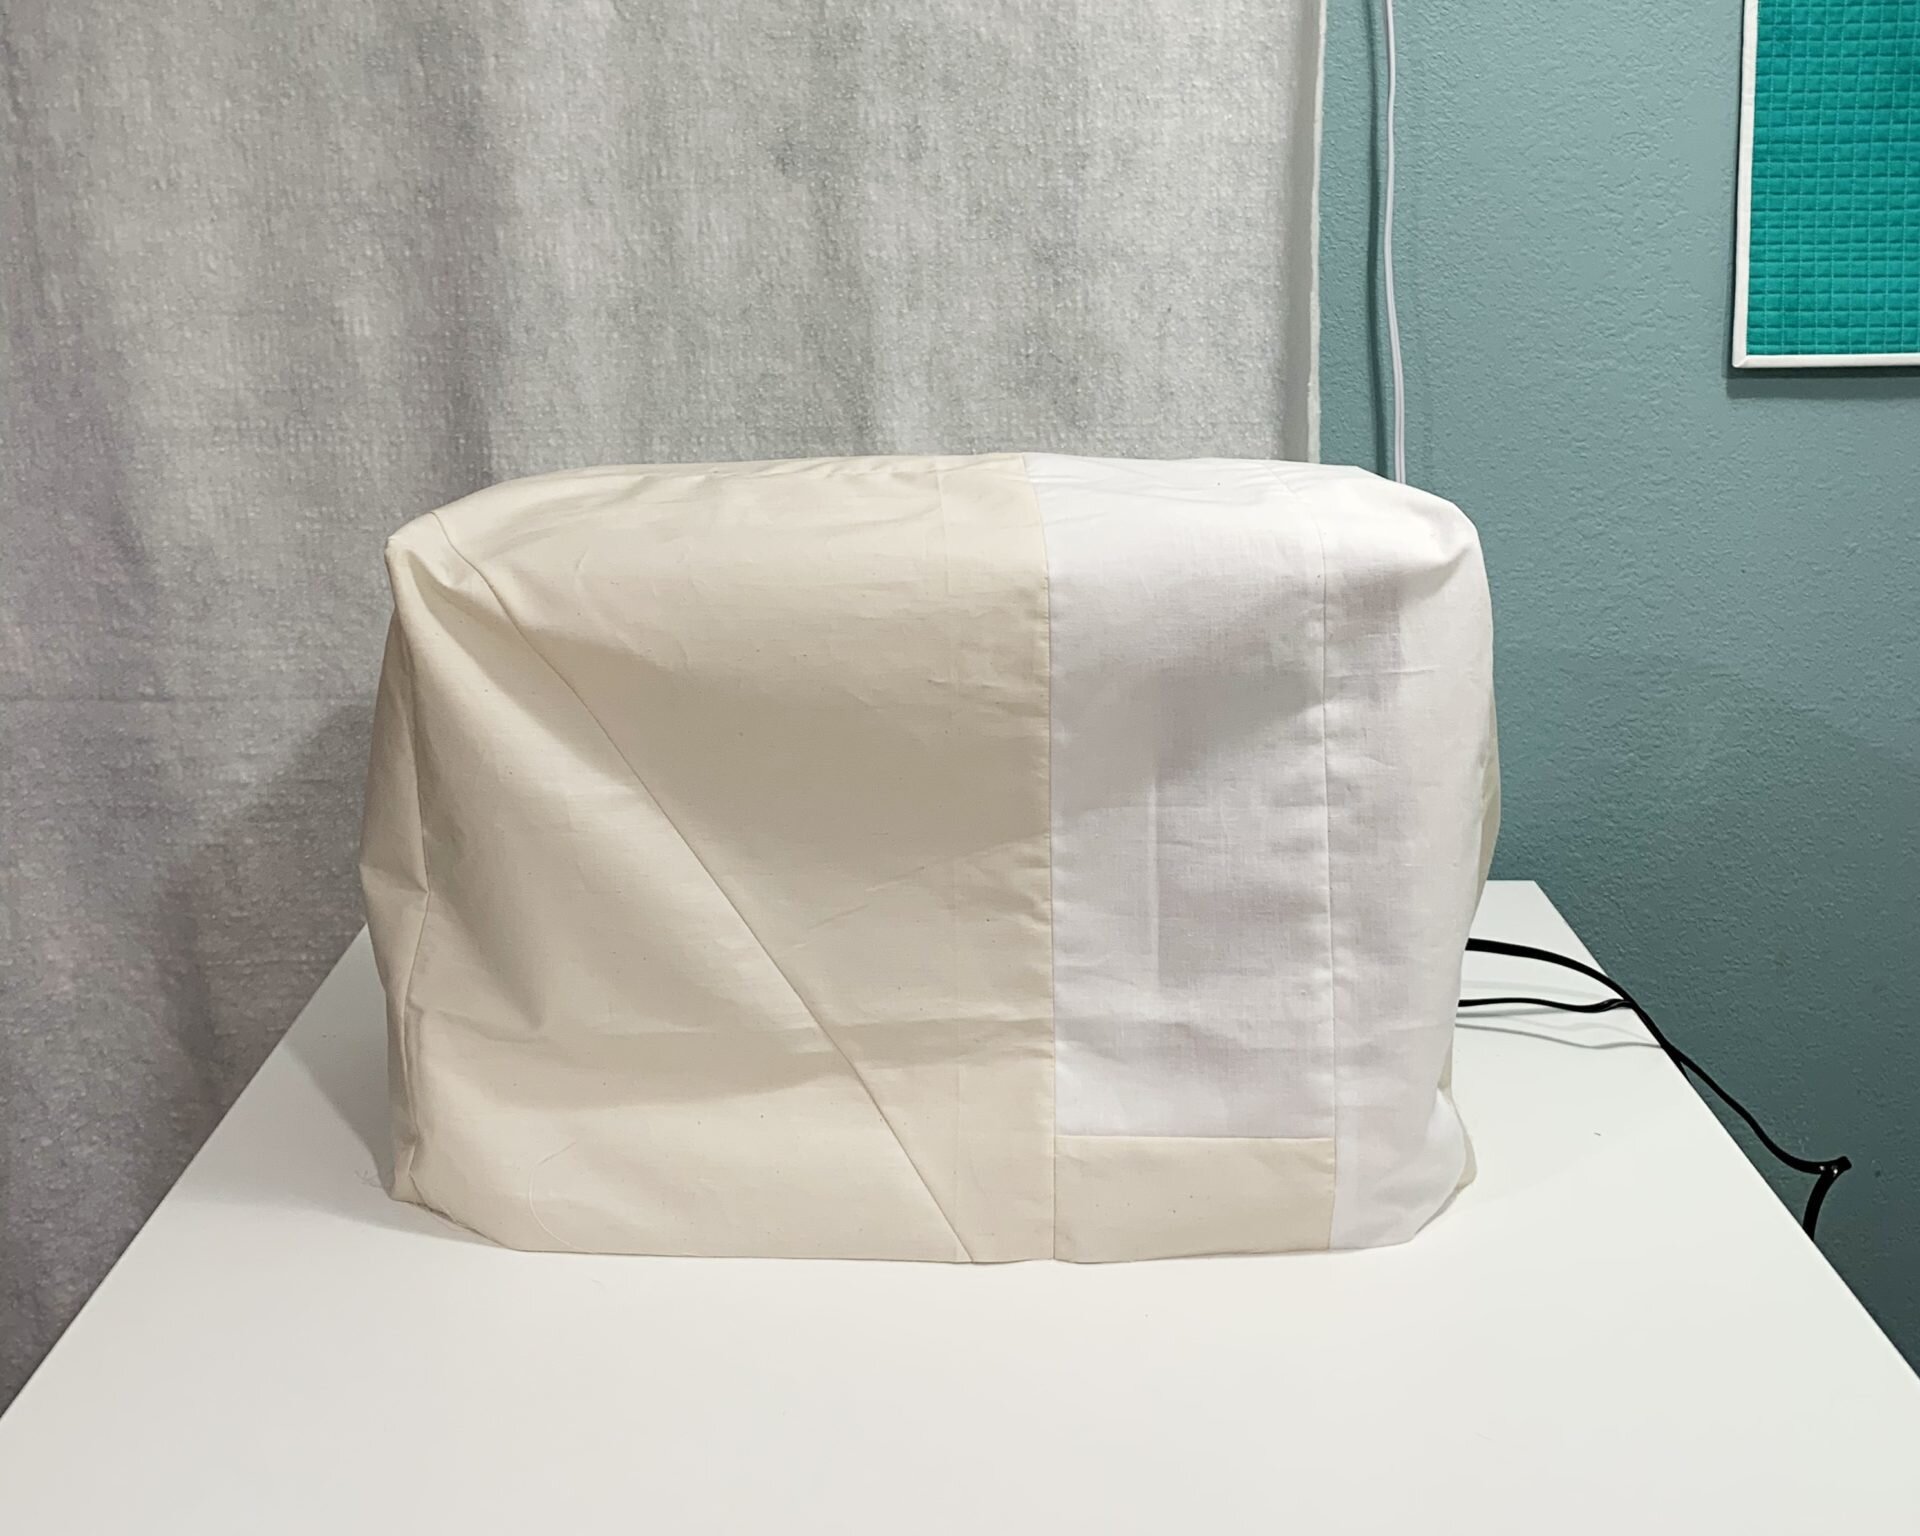 Quilted sewing machine cover (Tutorial) — Ben Millett